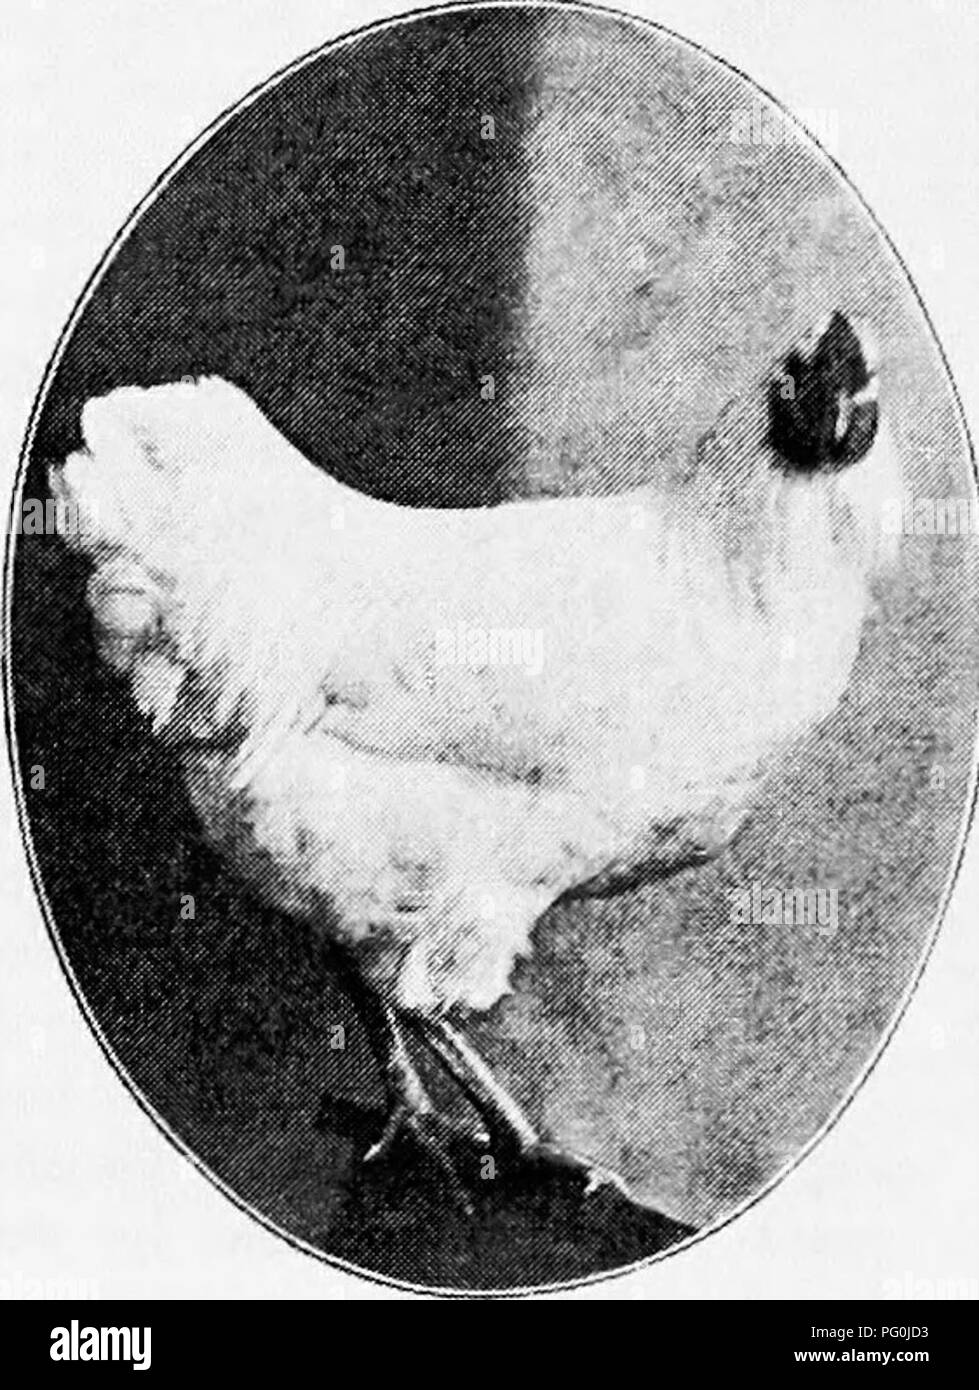 . Principles and practice of poultry culture . Poultry. 502 POULTRY CULTURE In selecting birds for breeding, the touch as well as by the eye. He should. Fig. 499. Young White Wyandotte cockerel. (Photograph from owner, A. G. Duston, South Framingham, Massachusetts) In ducks, geese, and turkeys there is comnmon faults are lack of breadth and poultry breeder should judge shape by handle the birds, lifting them with the keel across his palm so that his fin- gers on one side and thumb on the other give him at once the measure of development of meat on the body. With a little practice the sense of  Stock Photo